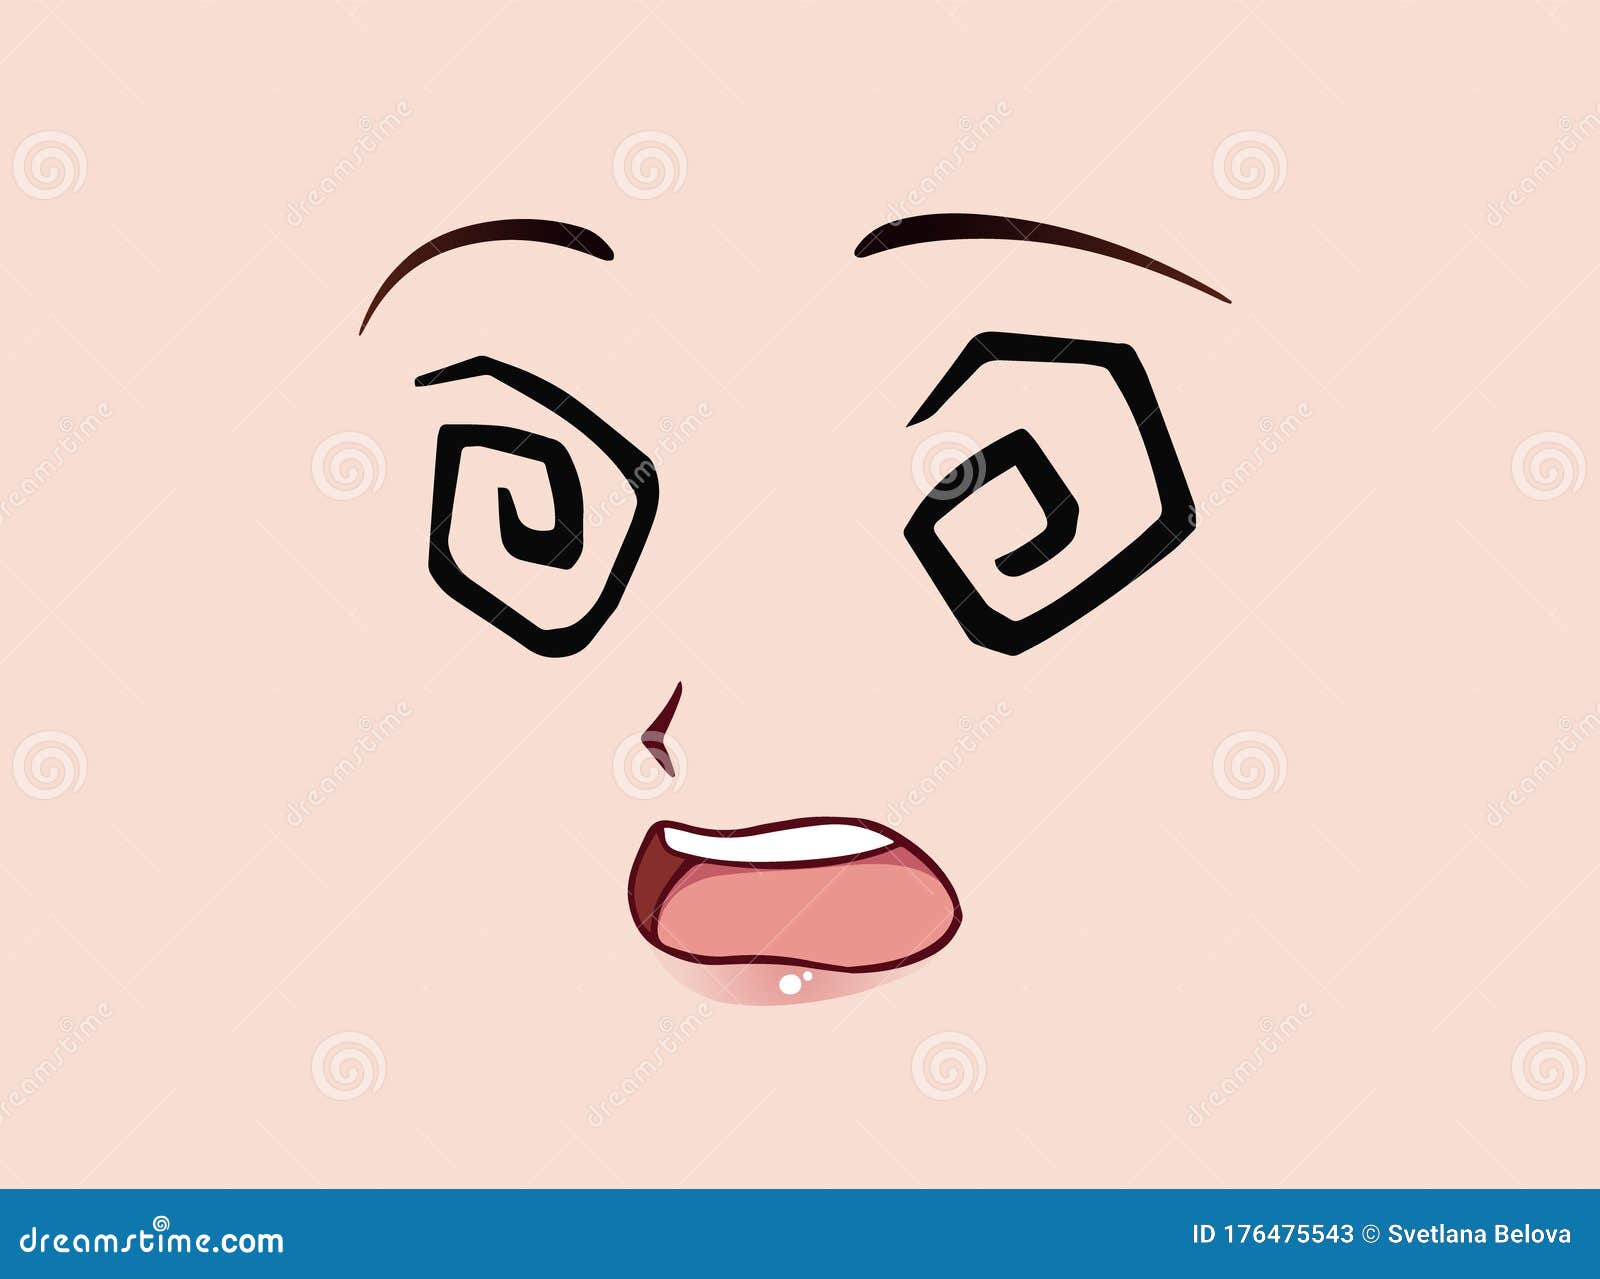 Scared Anime Face. Manga Style Funny Eyes, Little Nose and Kawaii Mouth  Stock Vector - Illustration of japanese, drawn: 176475543